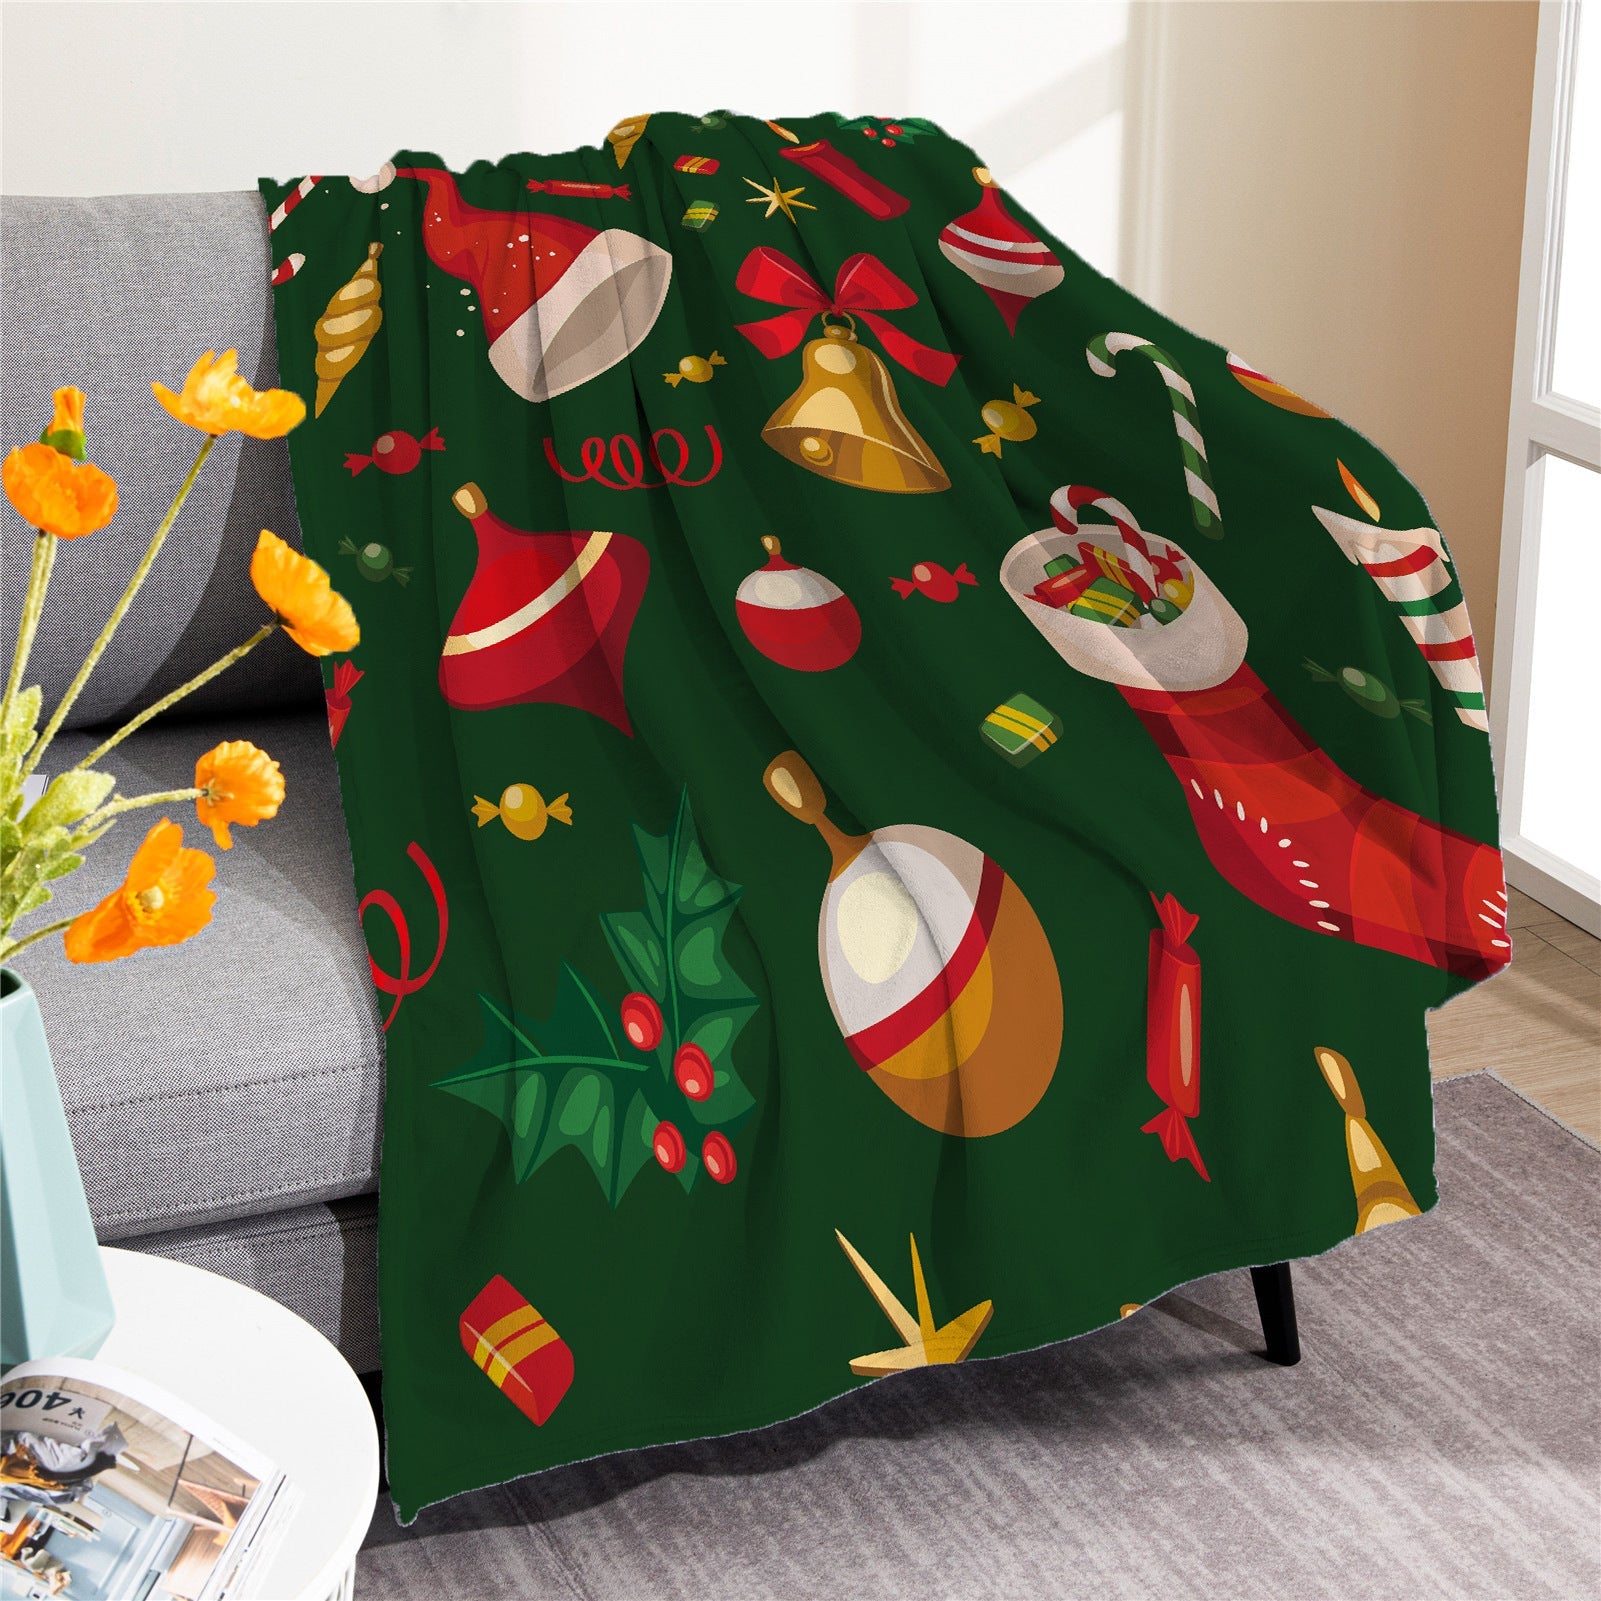 Merry Christmas Soft Fleece Throw Blankets-Blankets-M20220916-3-50*60 inches-Free Shipping at meselling99